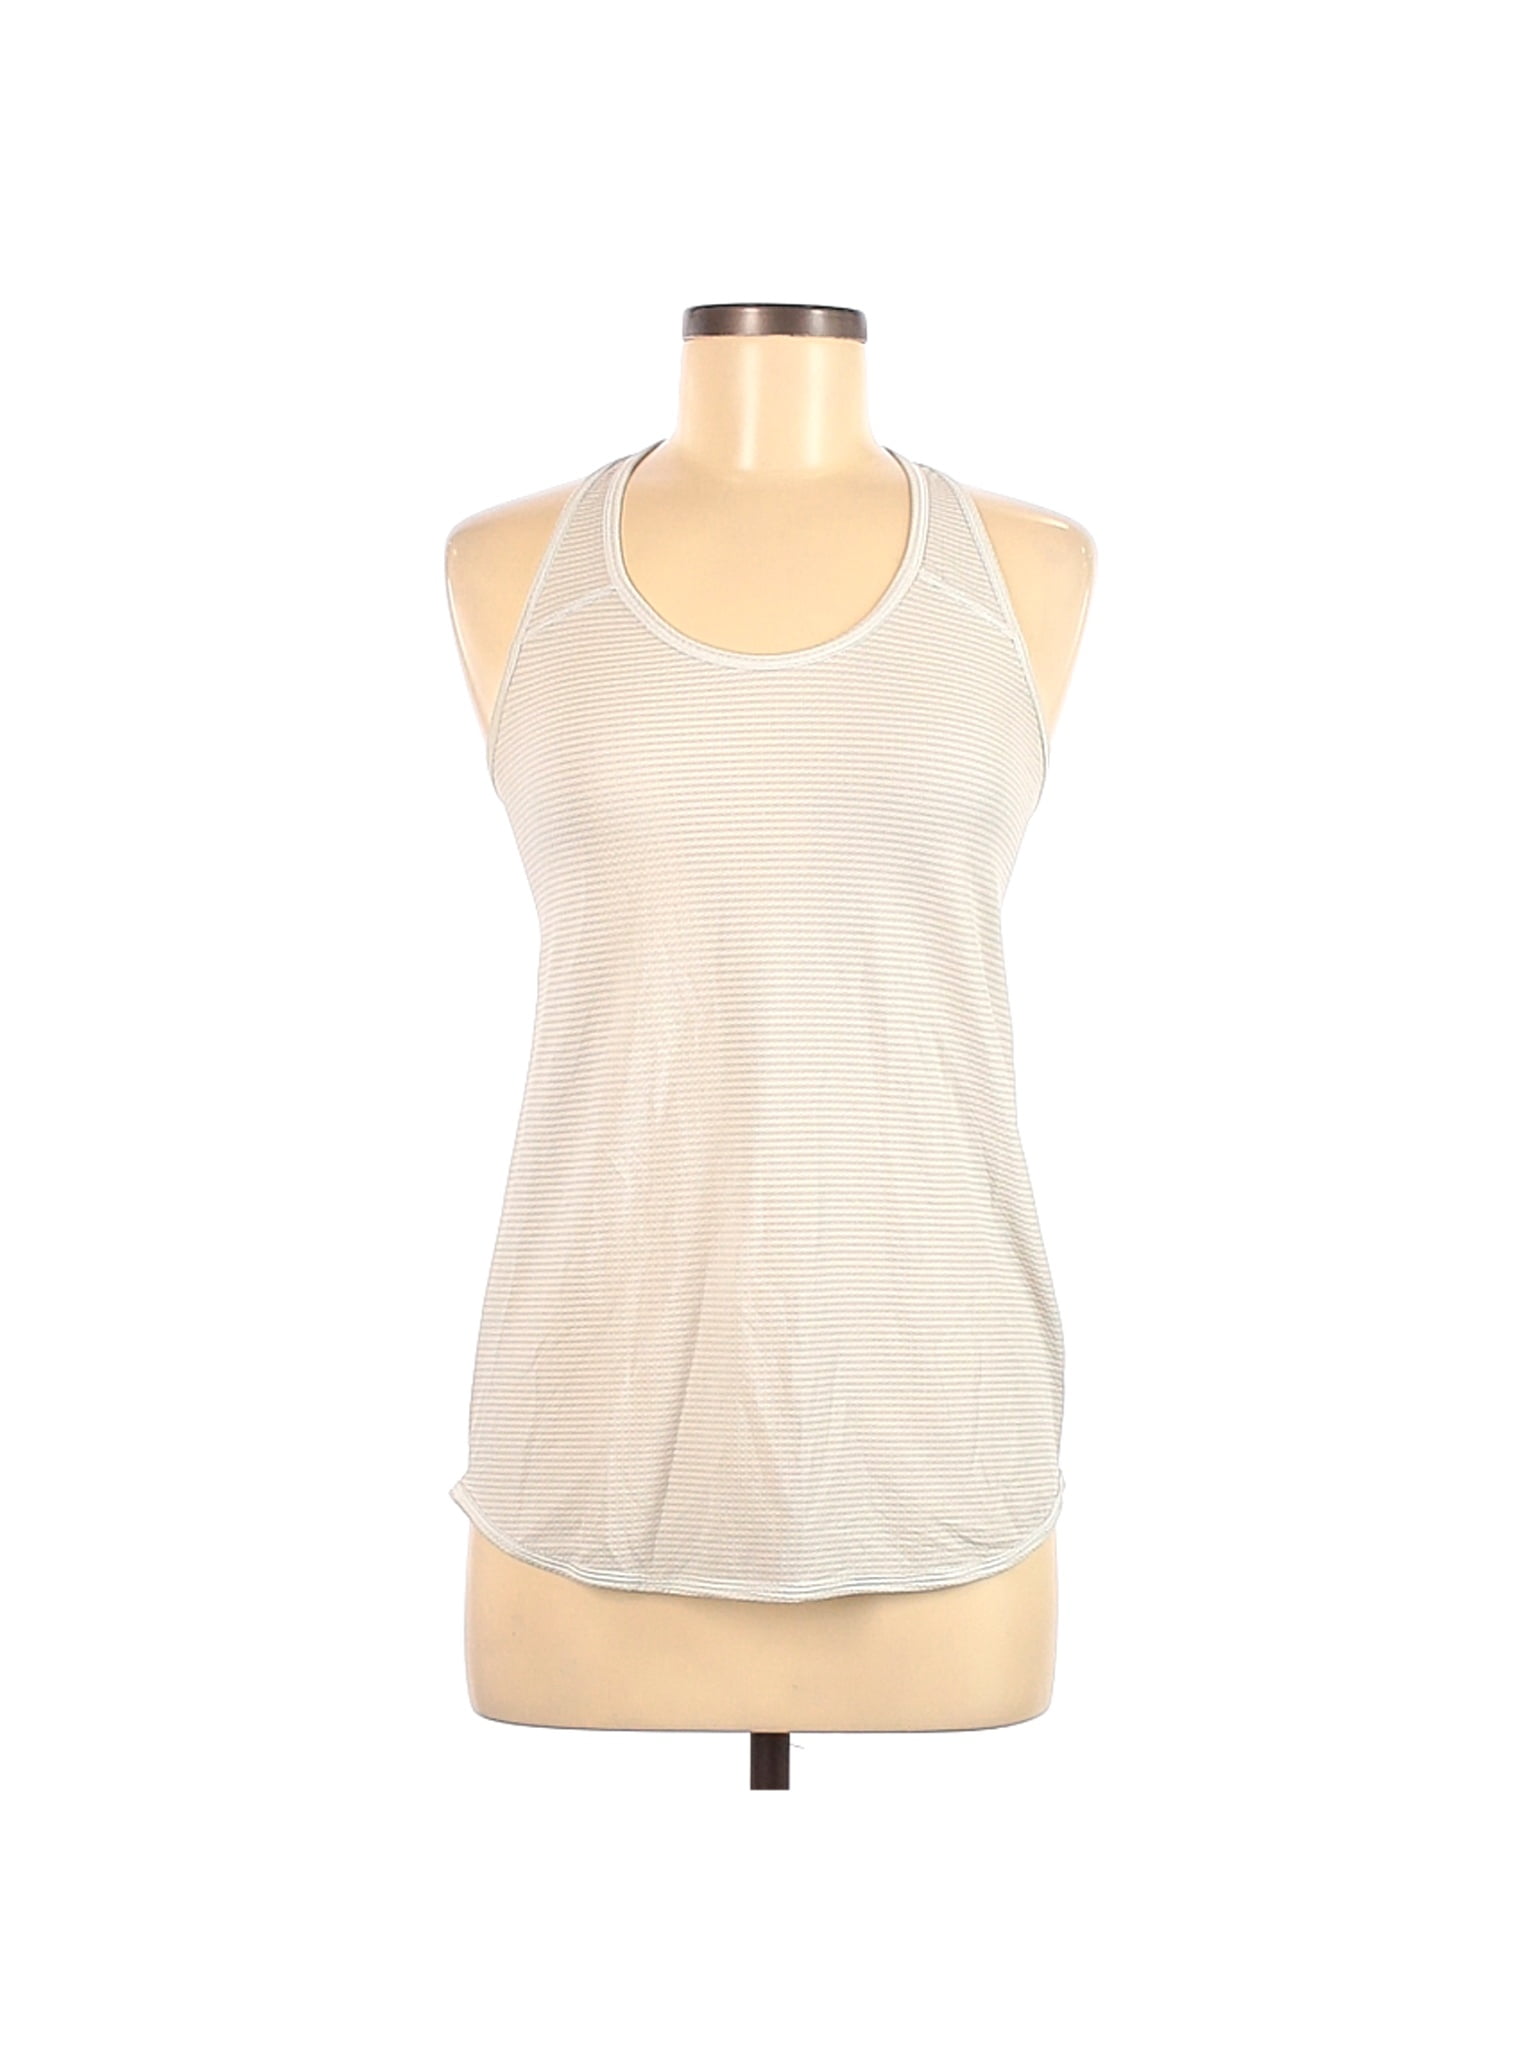 Pre-Owned Lululemon Athletica Womens Size 6 Active Nepal